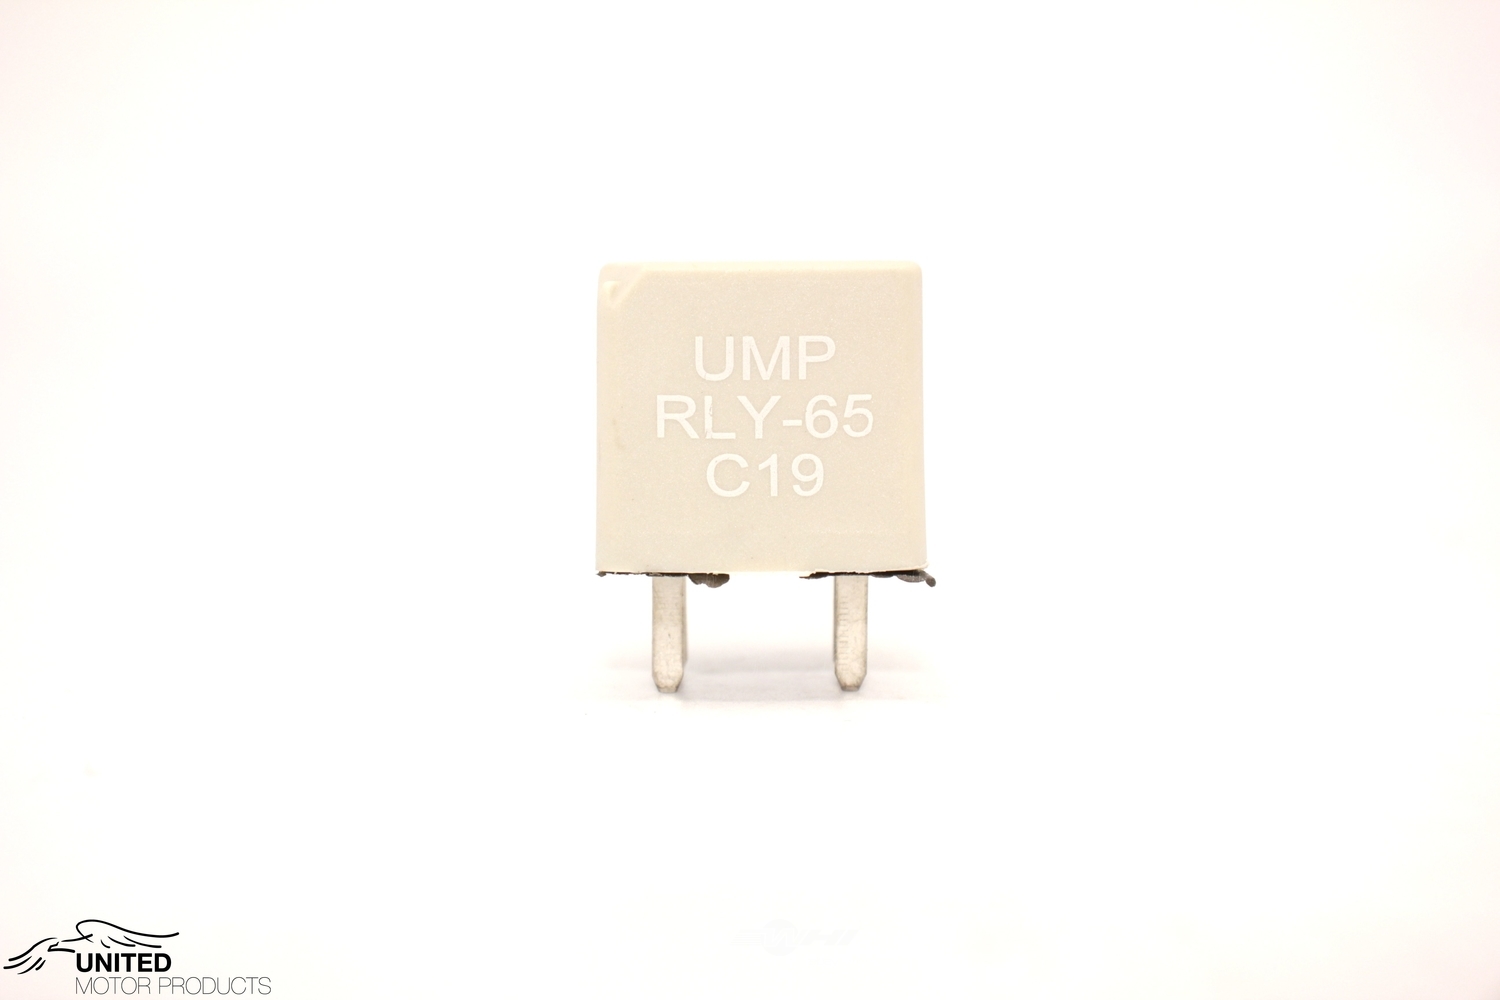 UNITED MOTOR PRODUCTS - Emission Control Relay - UIW RLY-65